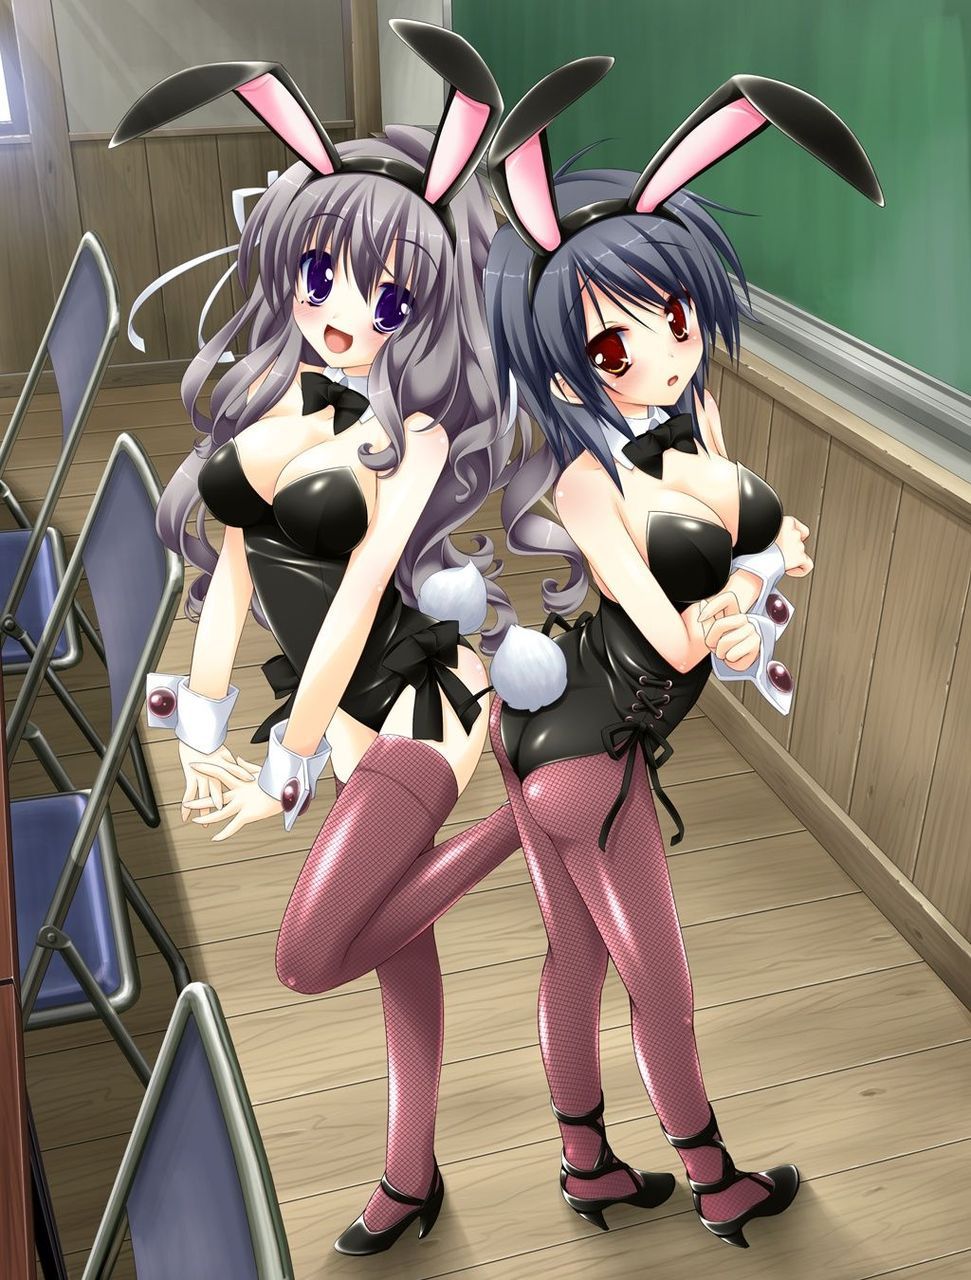 [2nd edition] erotic cute bunny's secondary image # 17 [Bunny Girl] 34